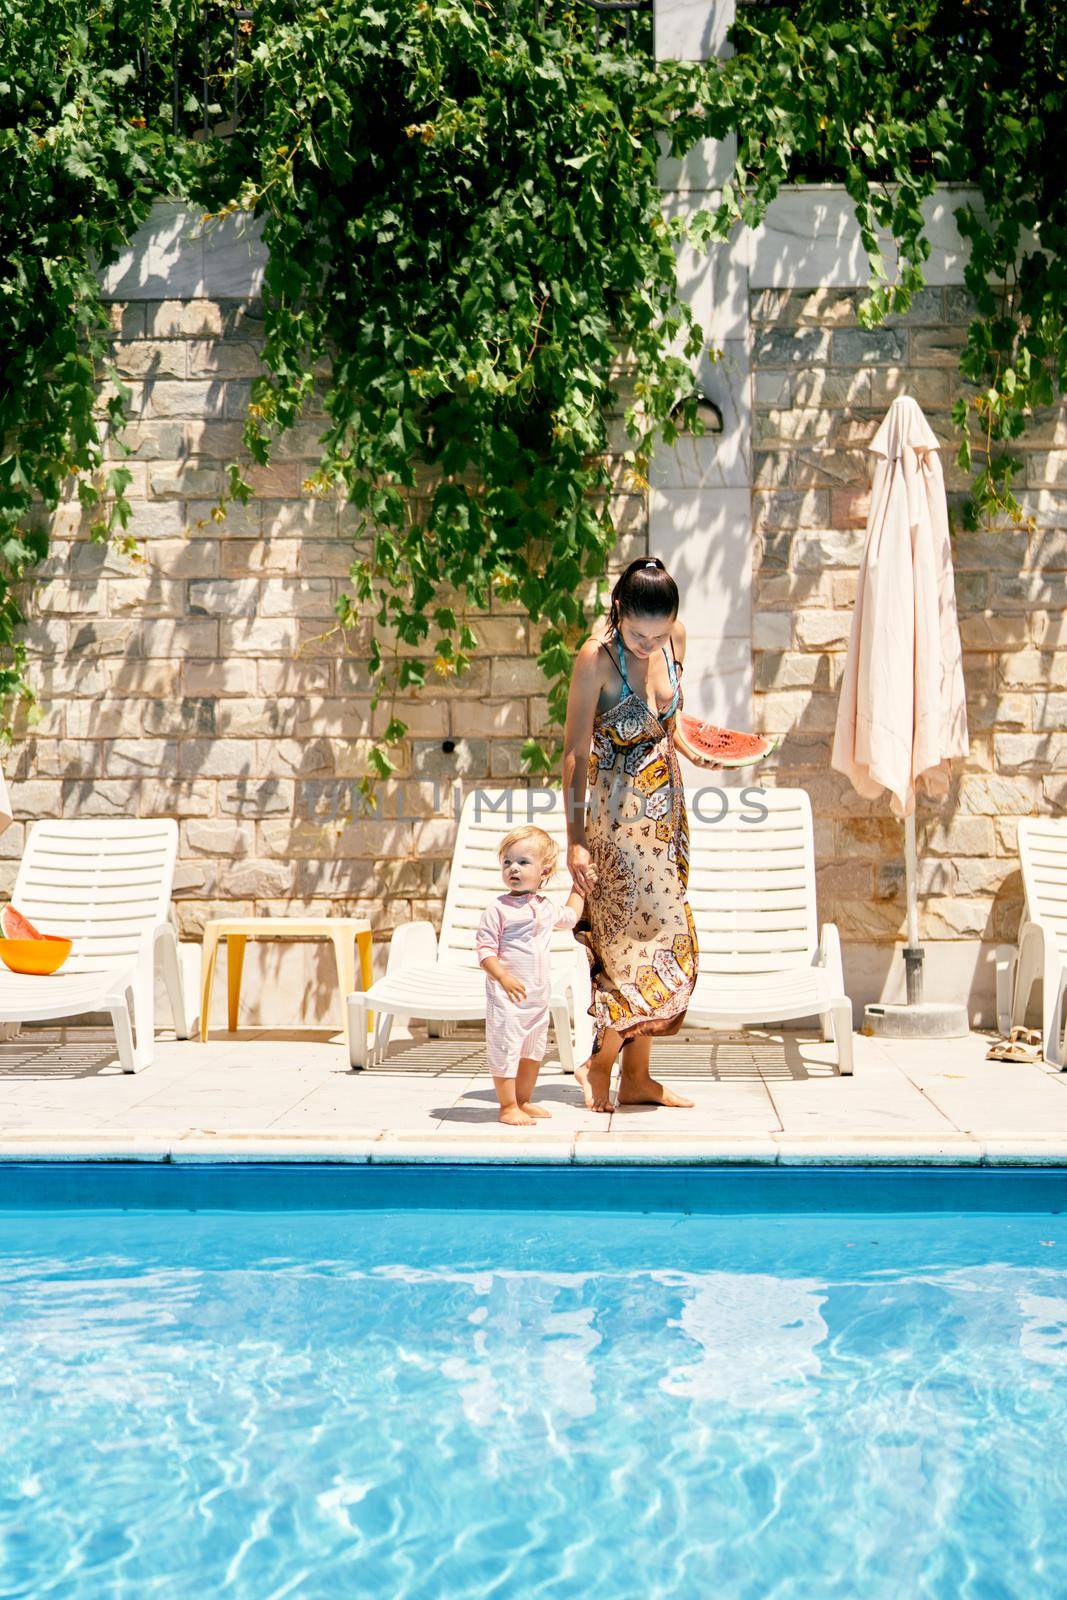 Mom with a watermelon in her hand leads a little girl to a sun lounger by the pool. High quality photo